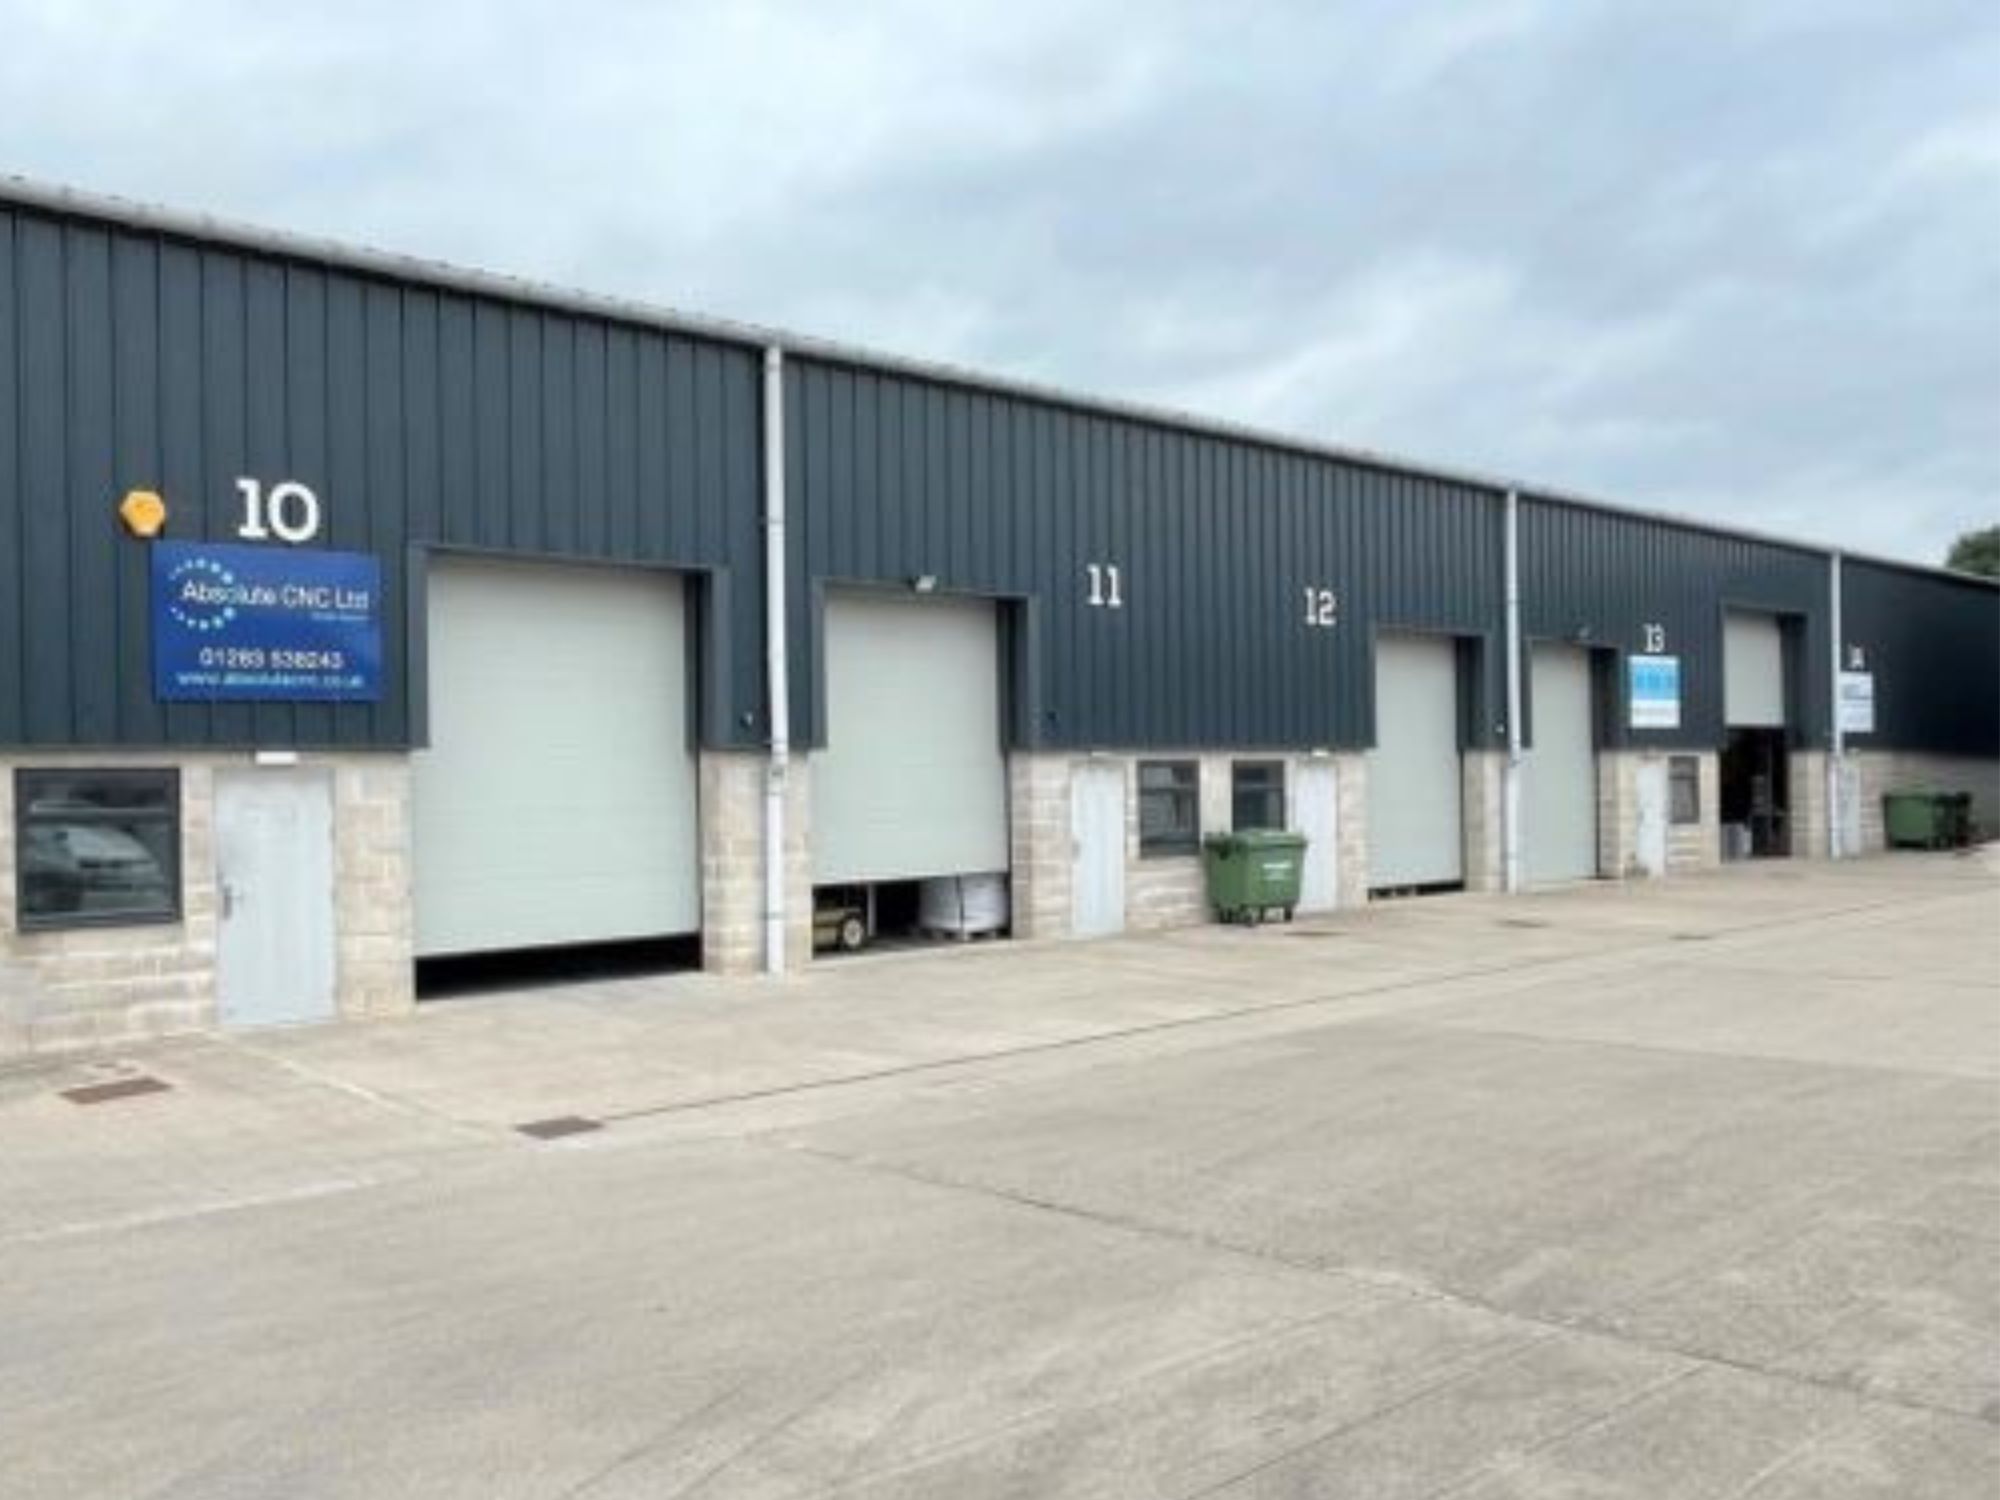 Industrial Unit/Warehouse to Let at Anslow, Burton-on-Trent, Staffordshire